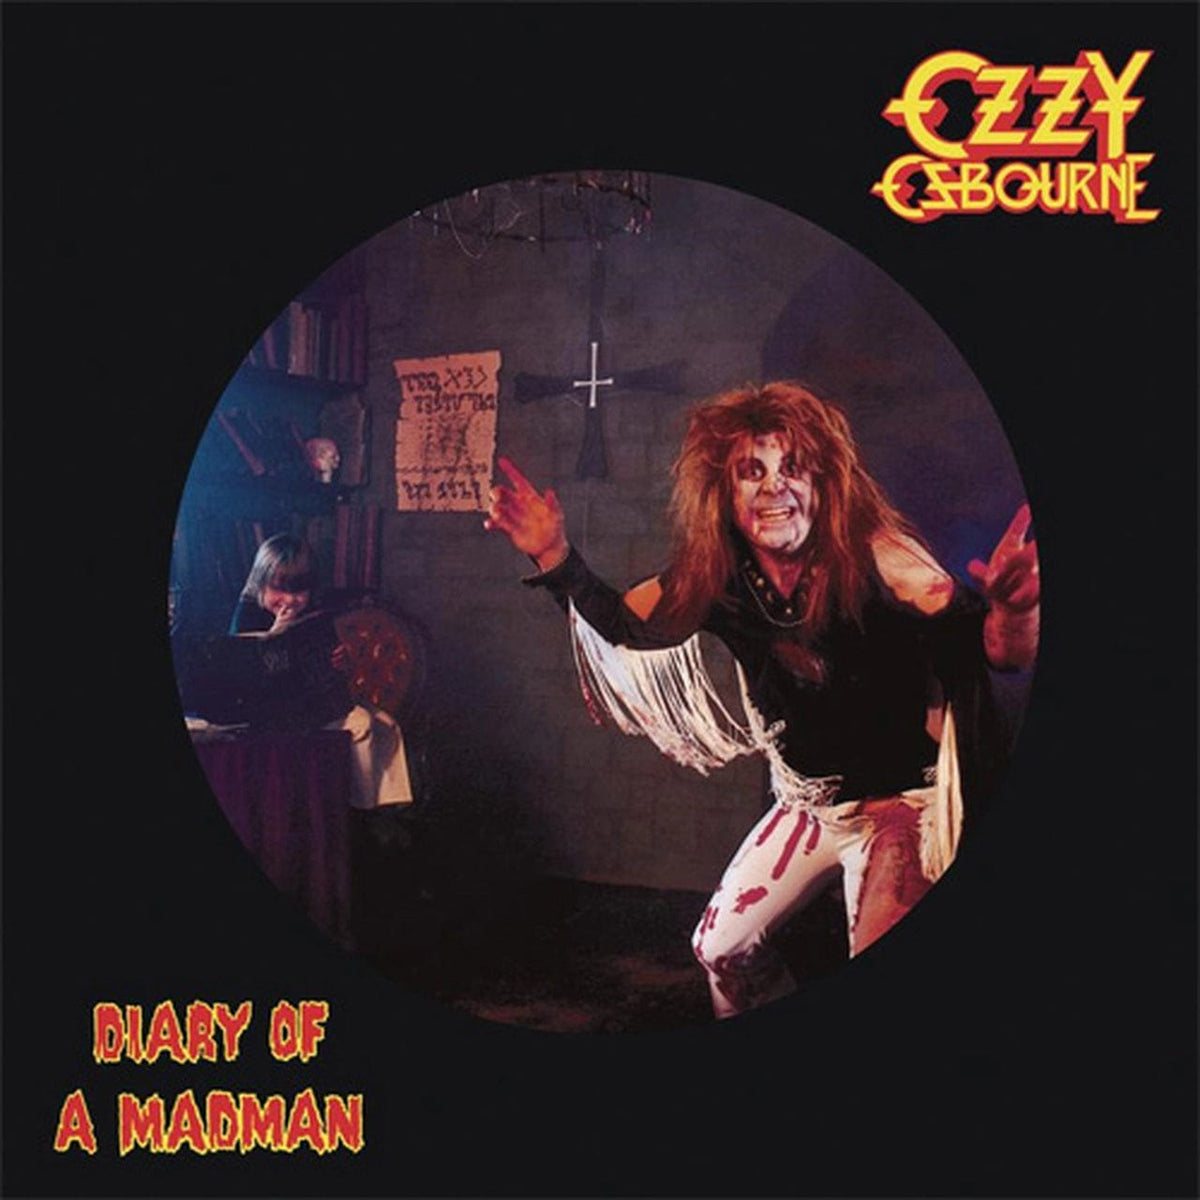 Ozzy Osbourne - Diary of a Madman - Picture Disc - Third Eye